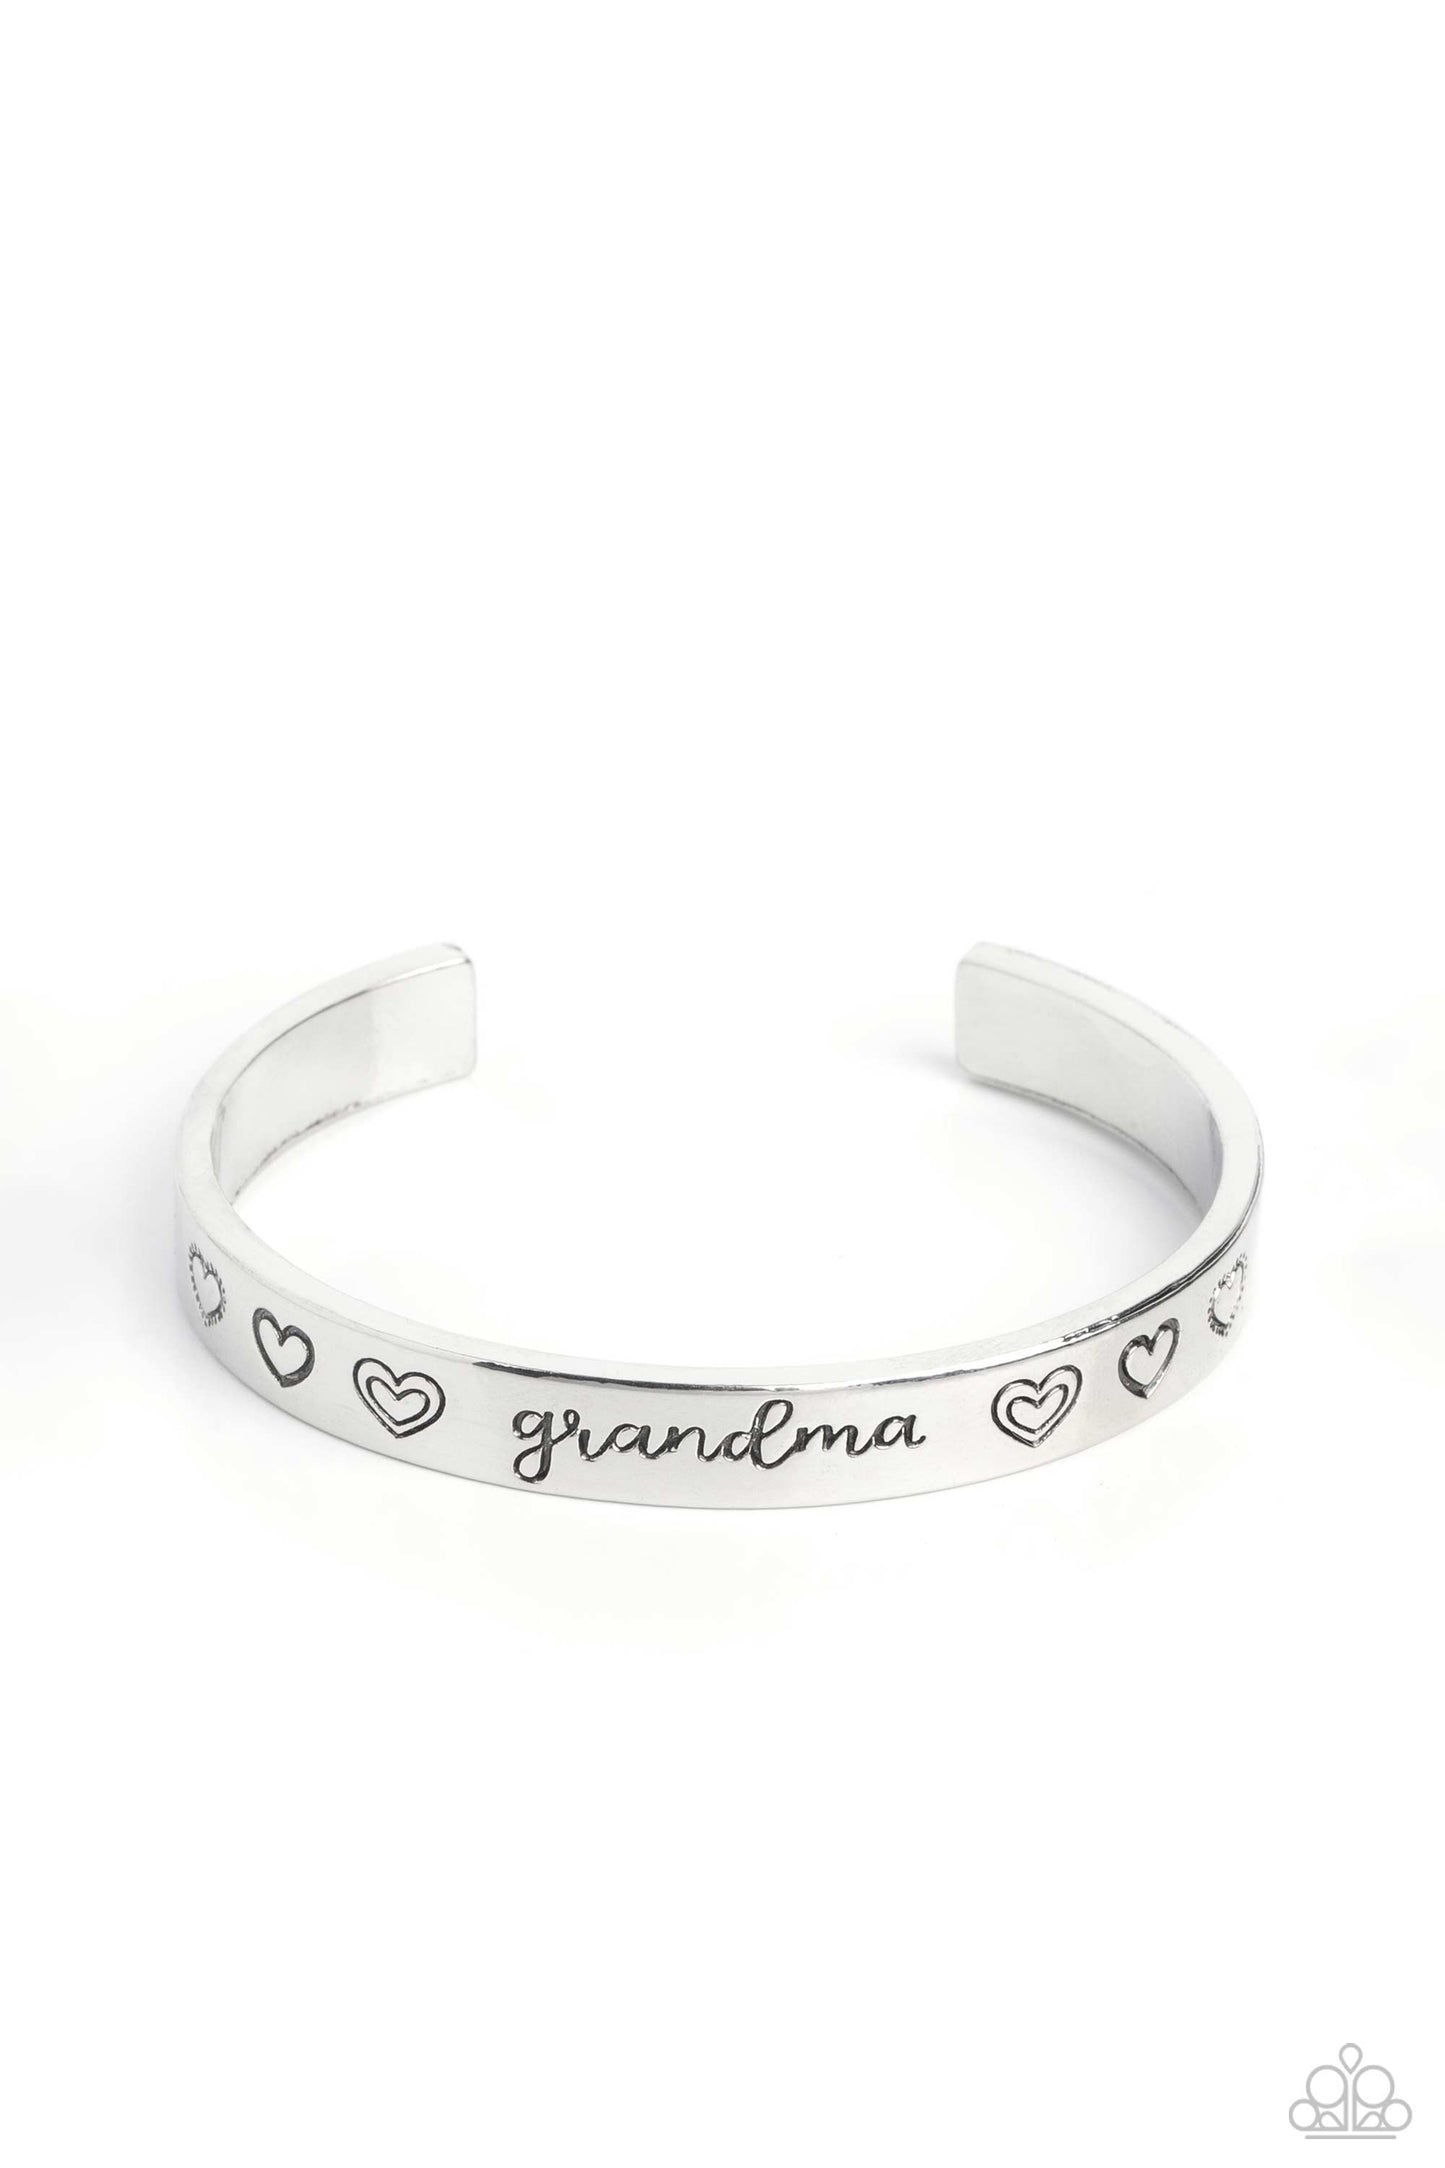 A Grandmother's Love - Silver